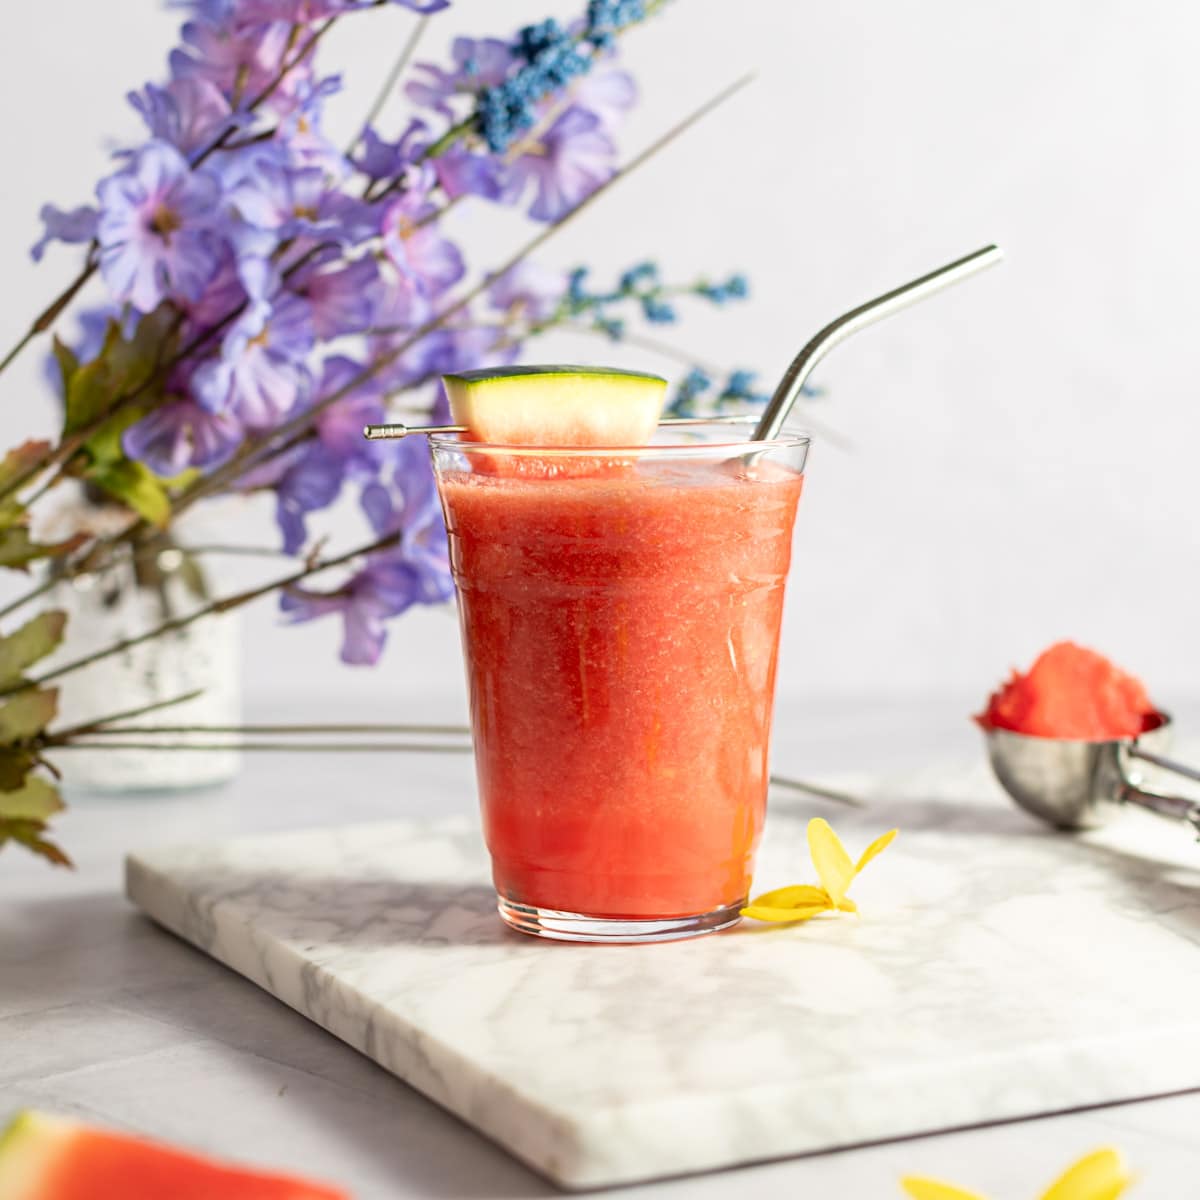 Watermelon Pineapple Smoothie - The Littlest Crumb